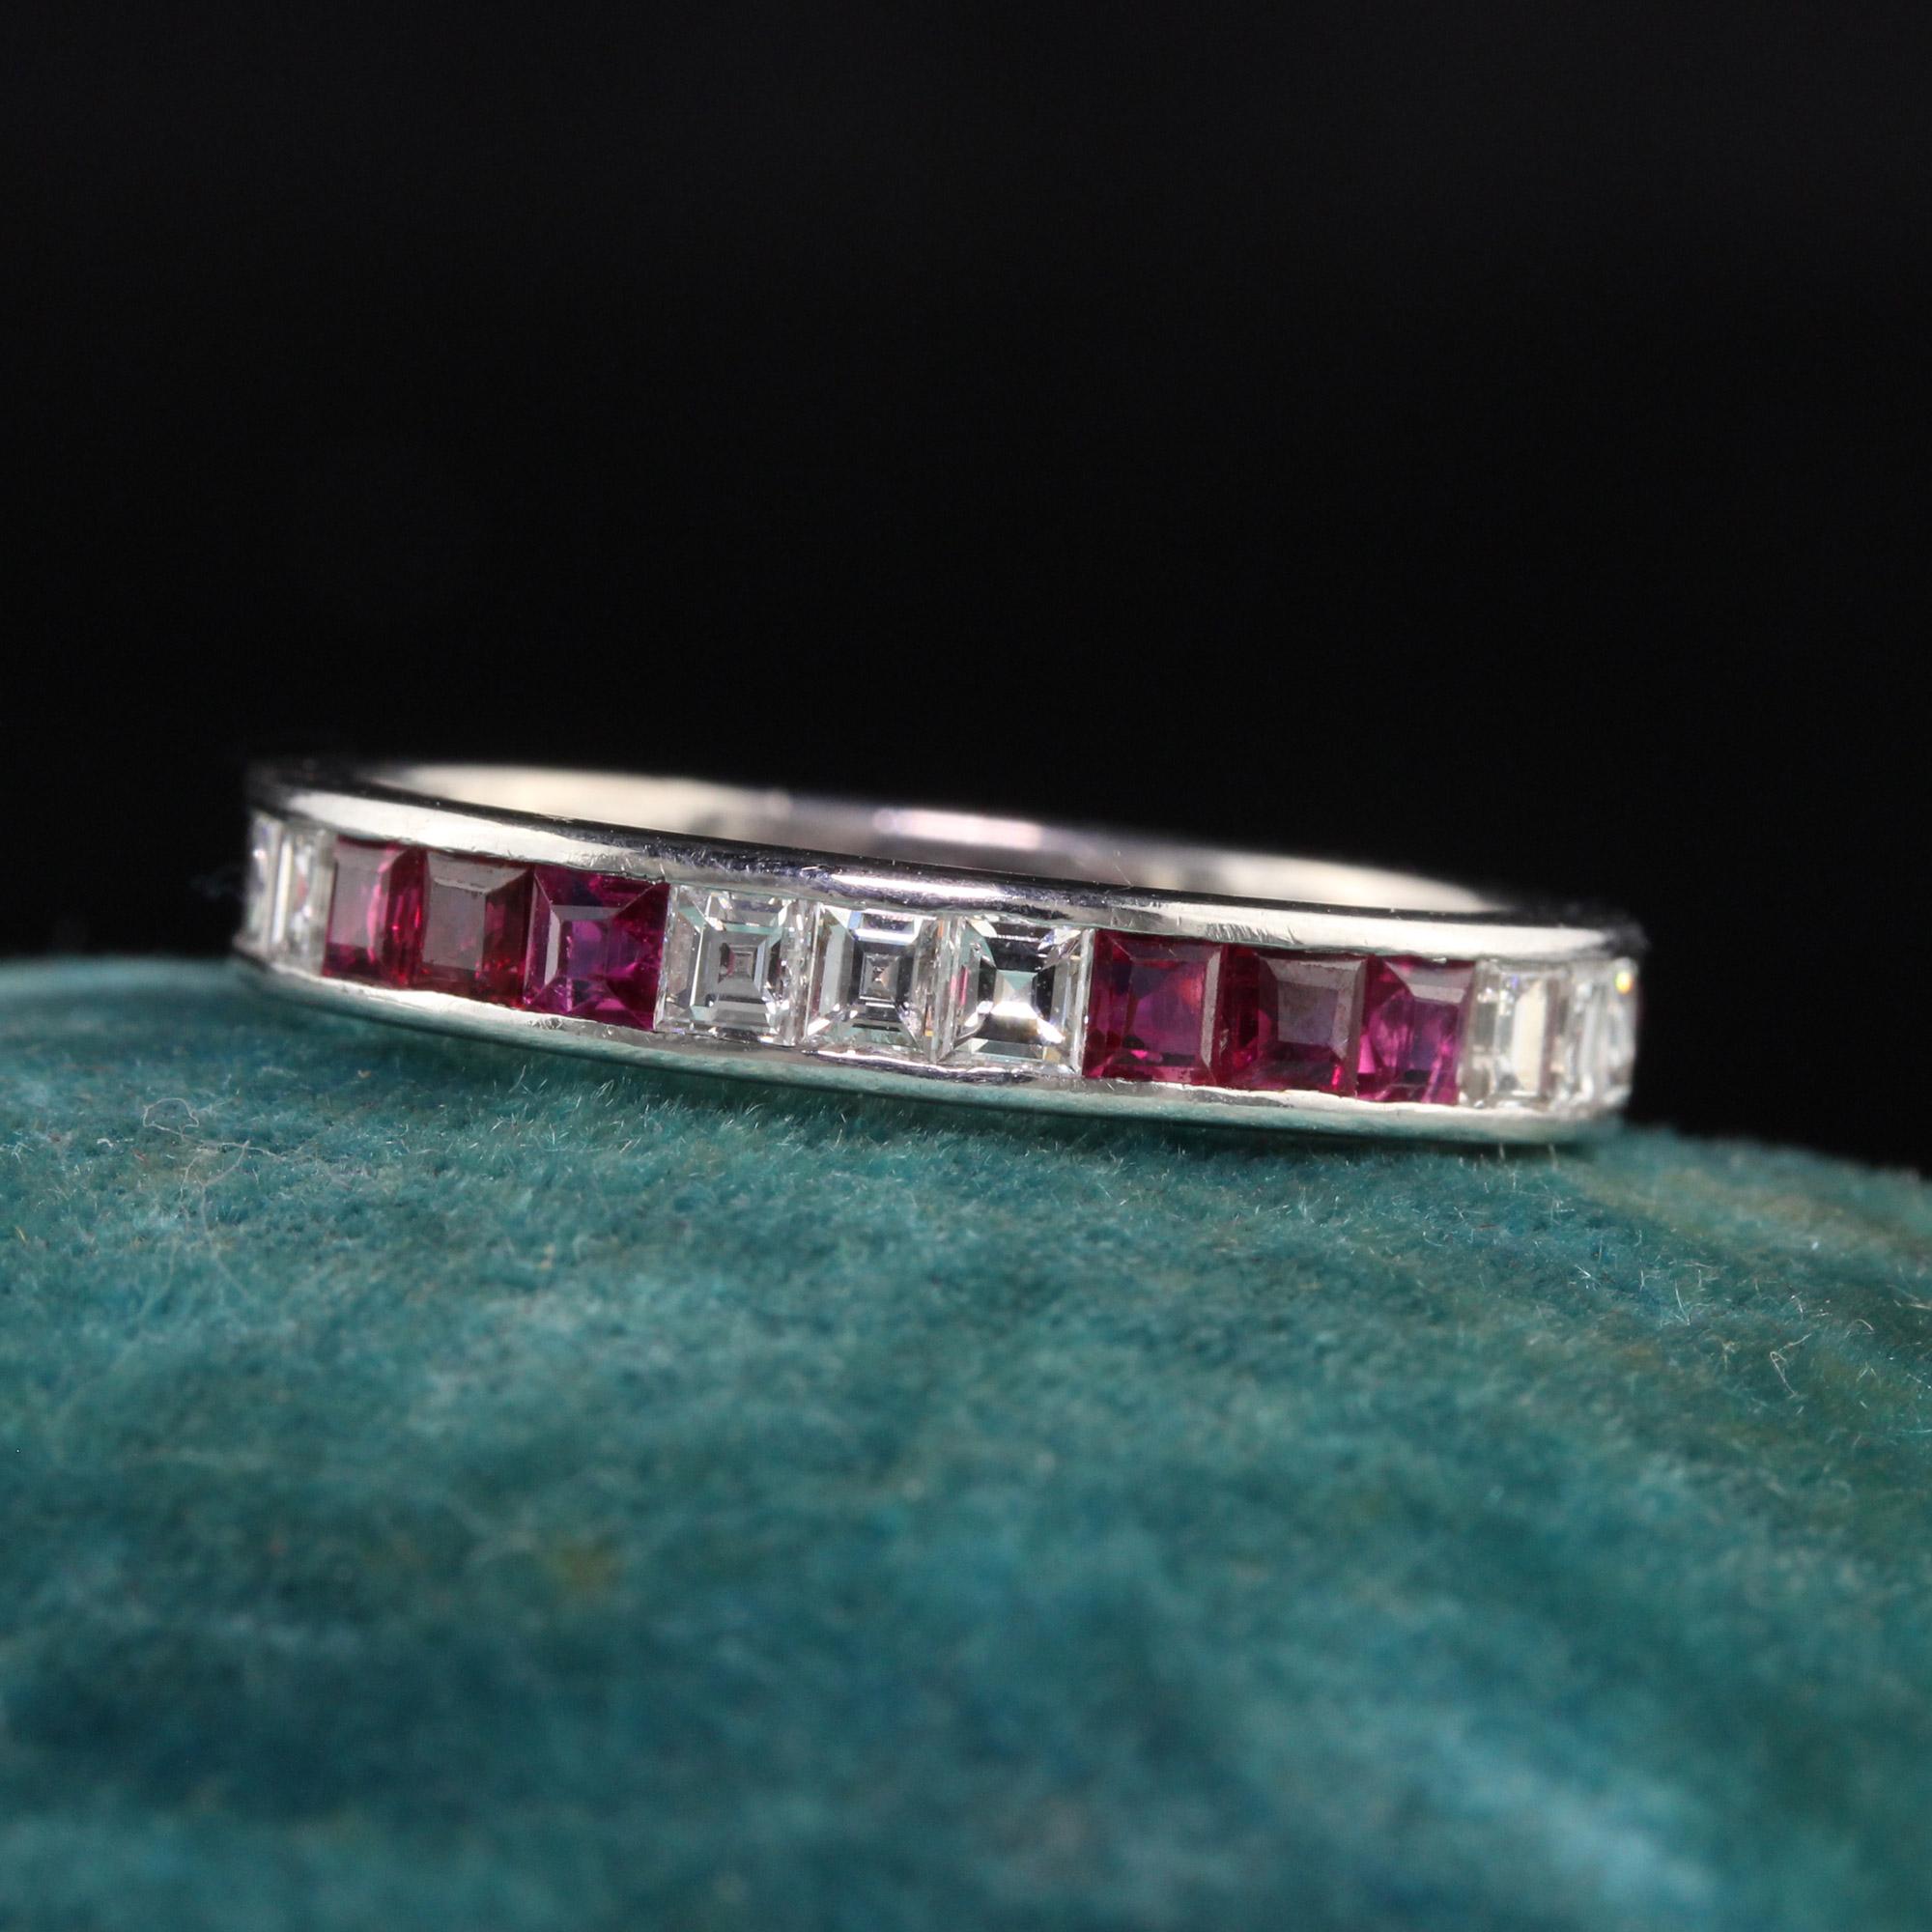 Beautiful Antique Art Deco 18K White Gold Carre Cut Diamond and Ruby Wedding Band. This beautiful wedding band is crafted in 18k white gold. There are carre cut diamonds and rubies in groups of three going around the entire ring. It is in good